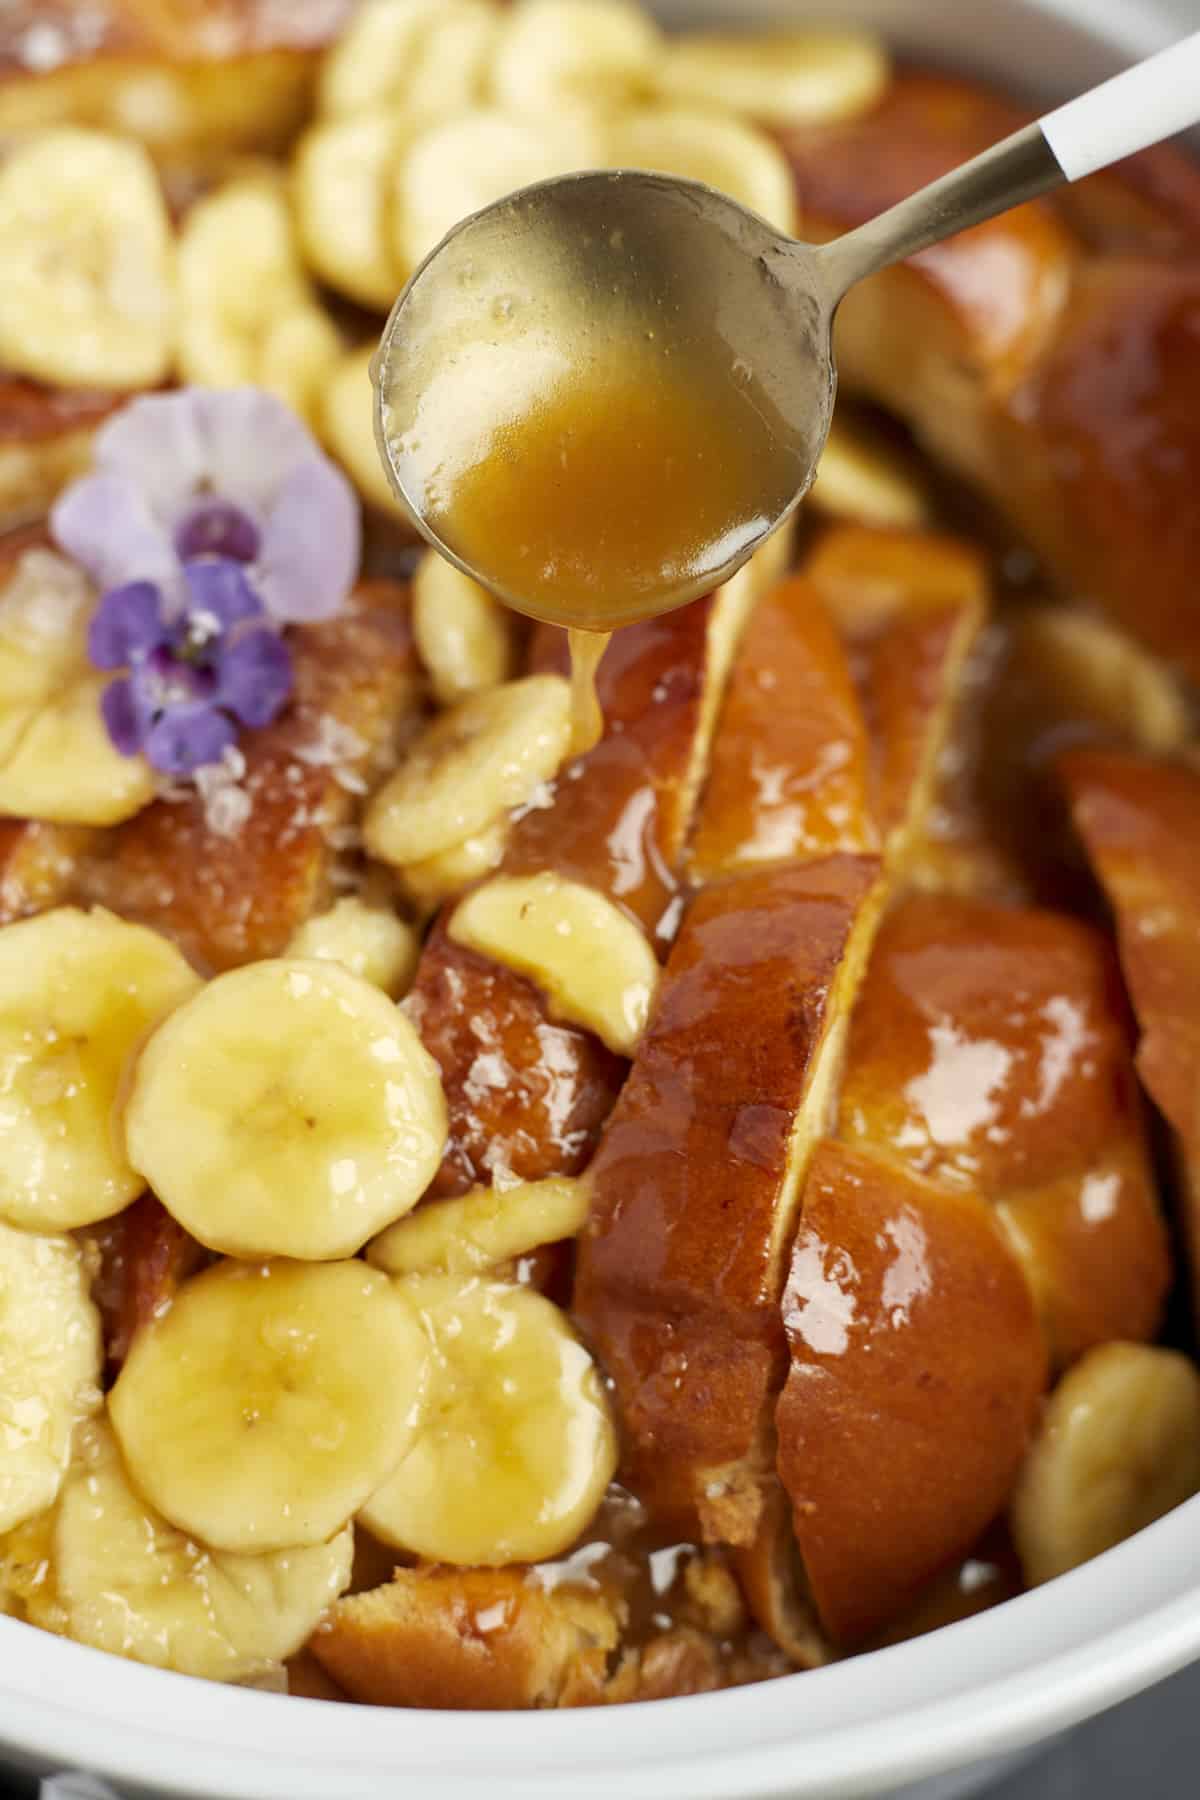 a brown sugar mixture being poured over bananas foster french toast